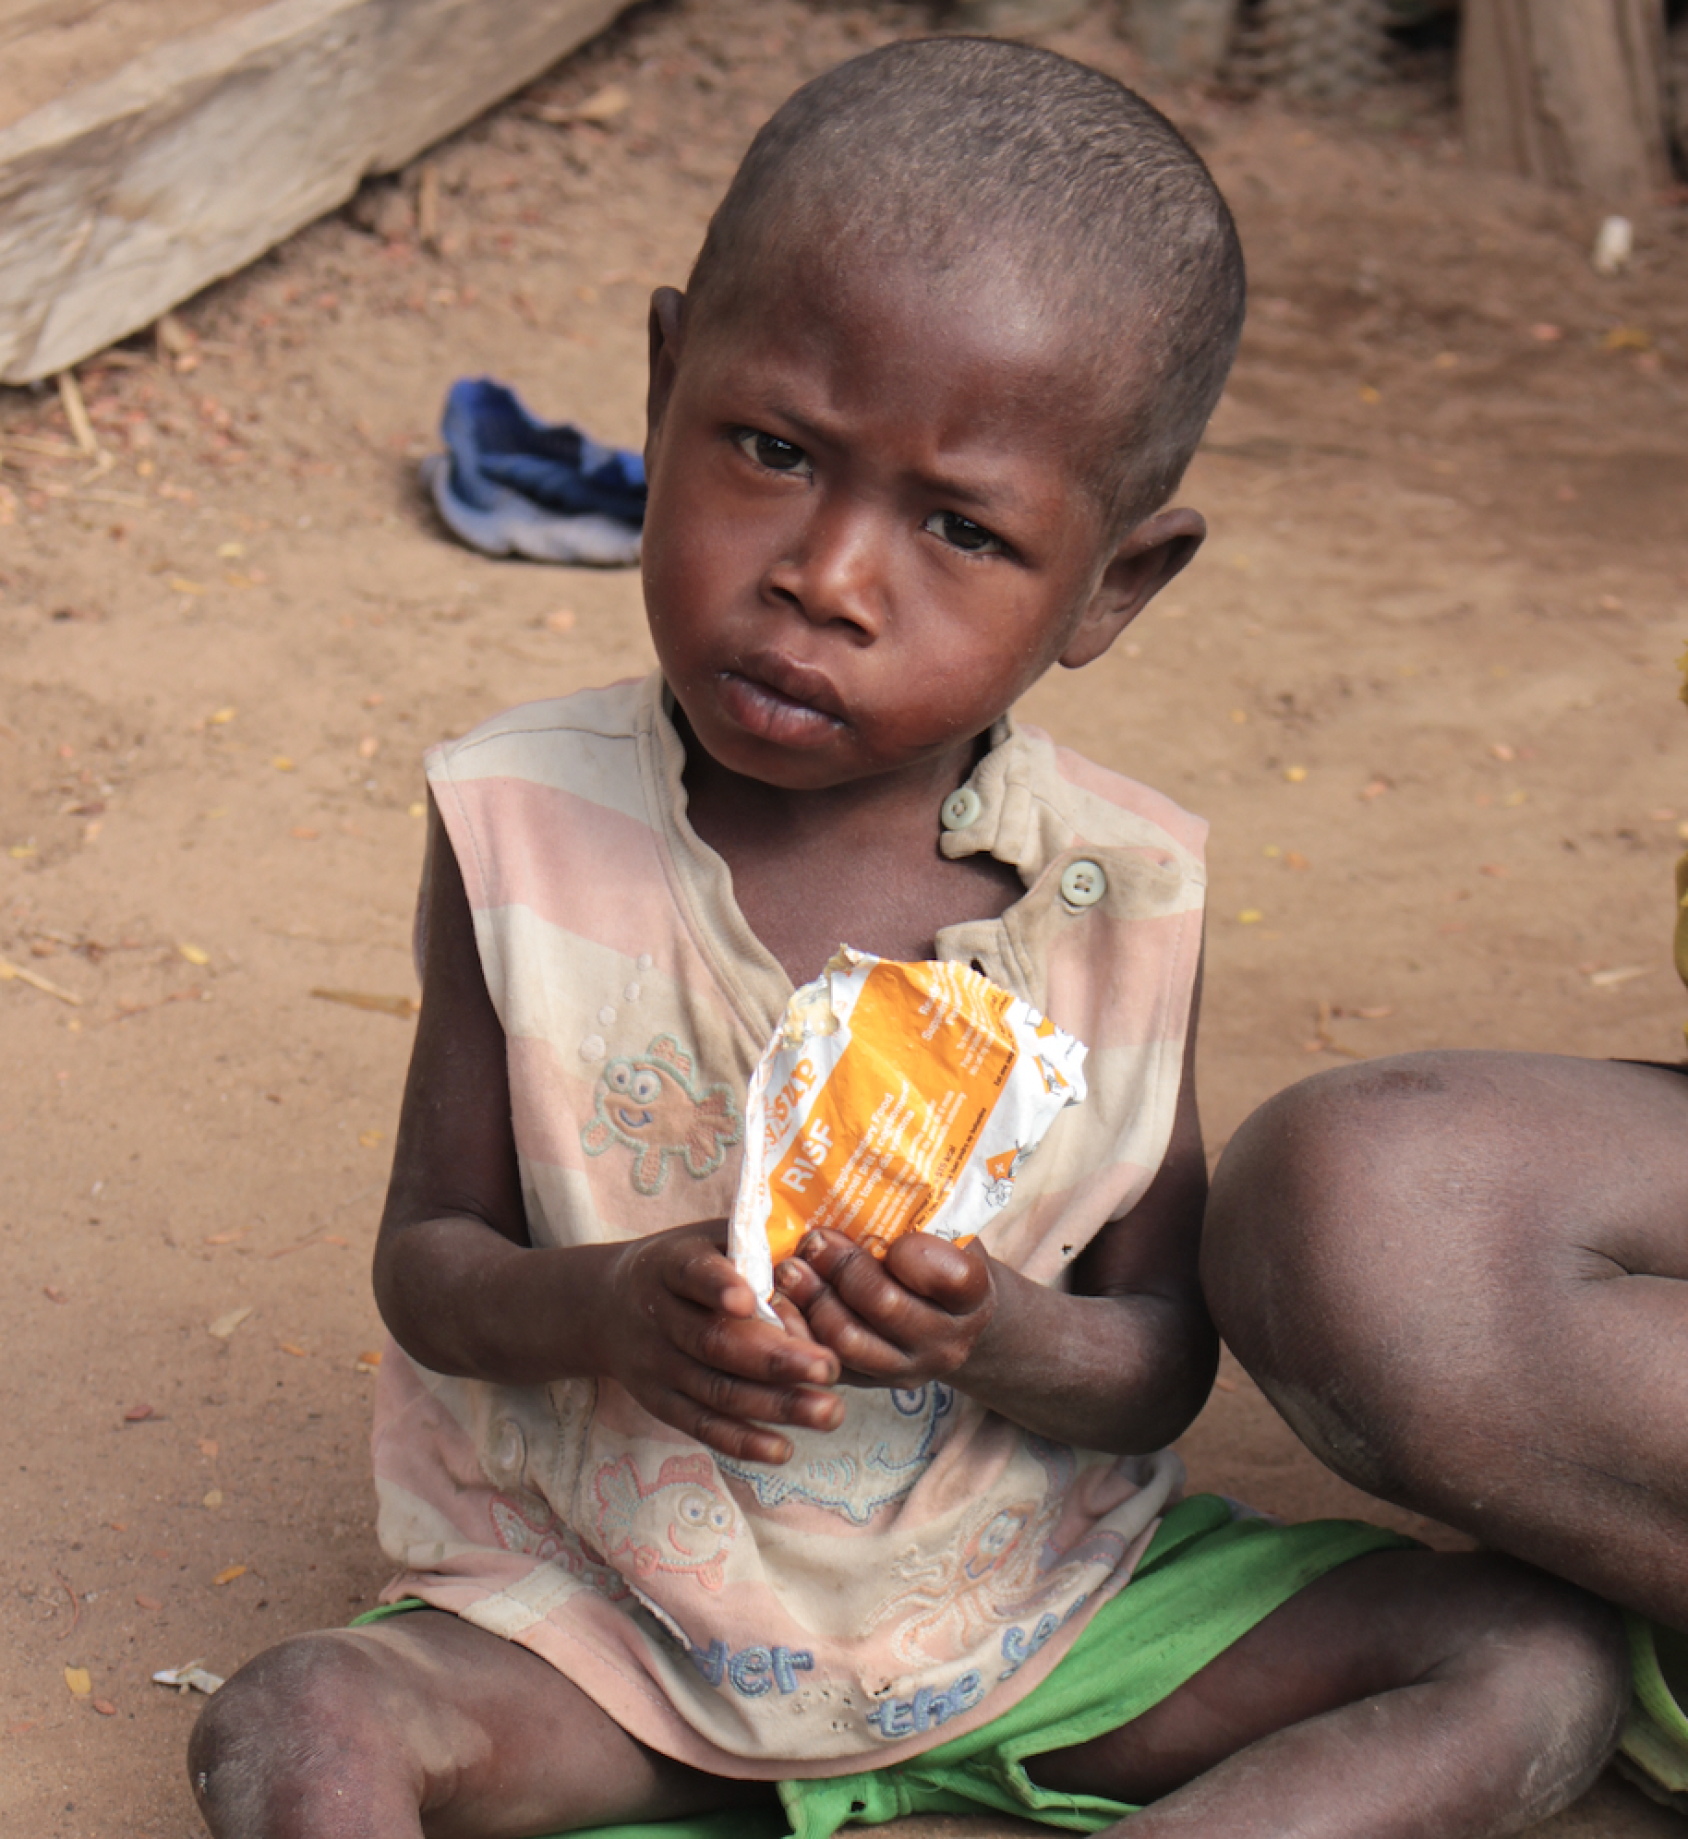 A young child in a pink and white shirt holds a food supplement in their hands.